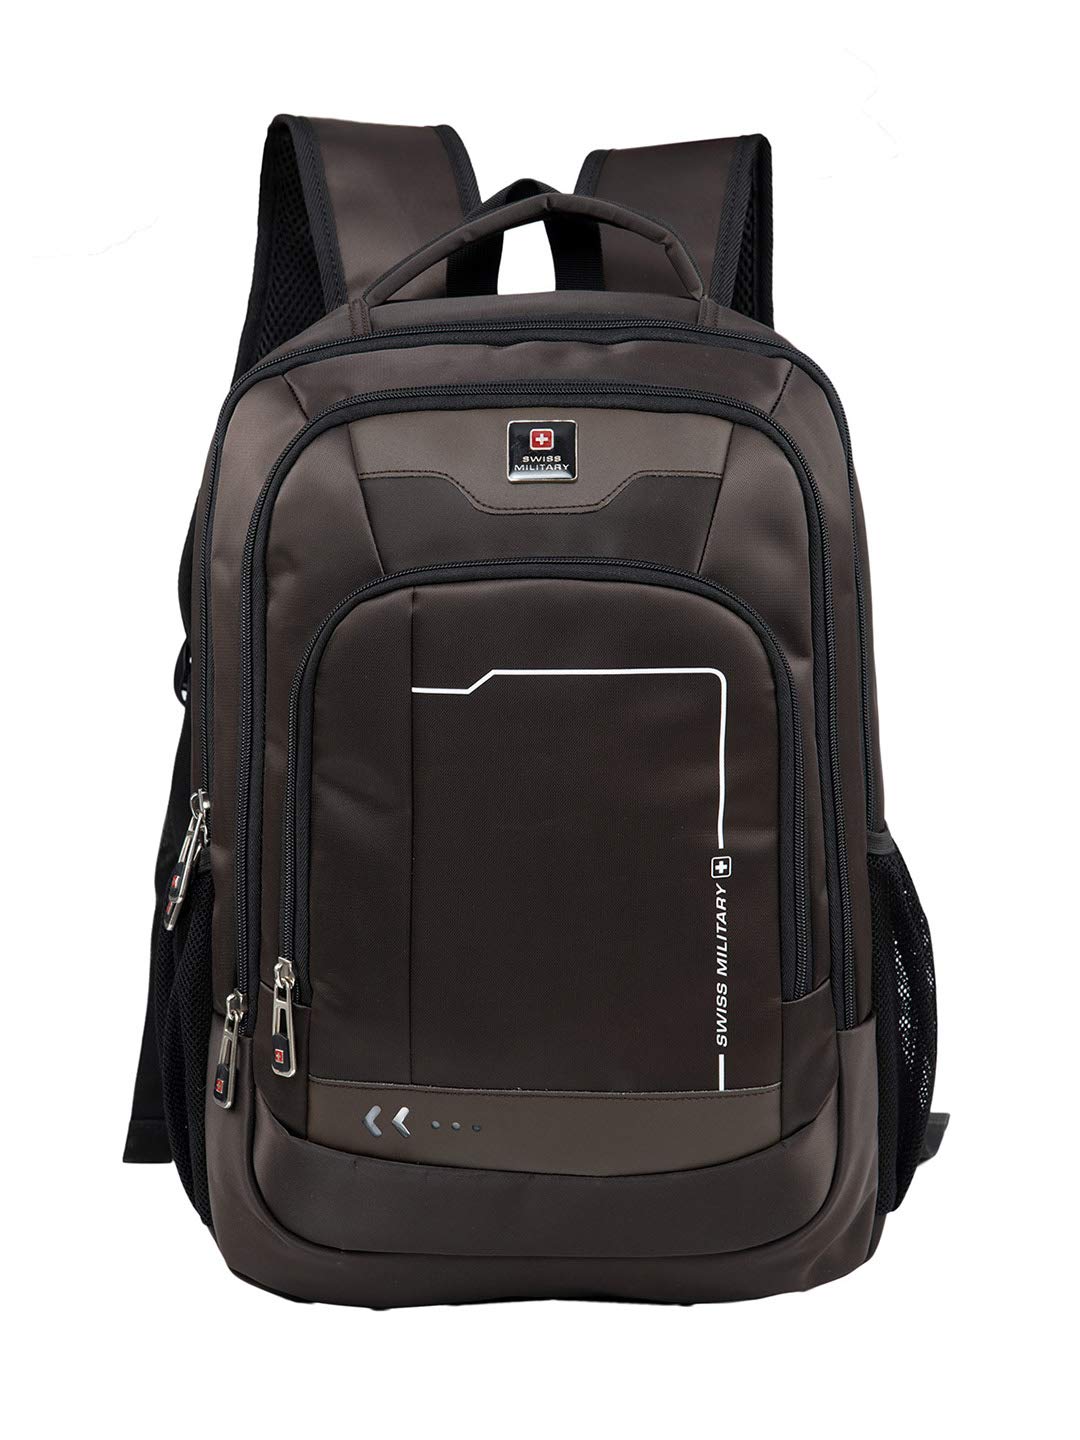 Swiss Military Laptop Backpack 